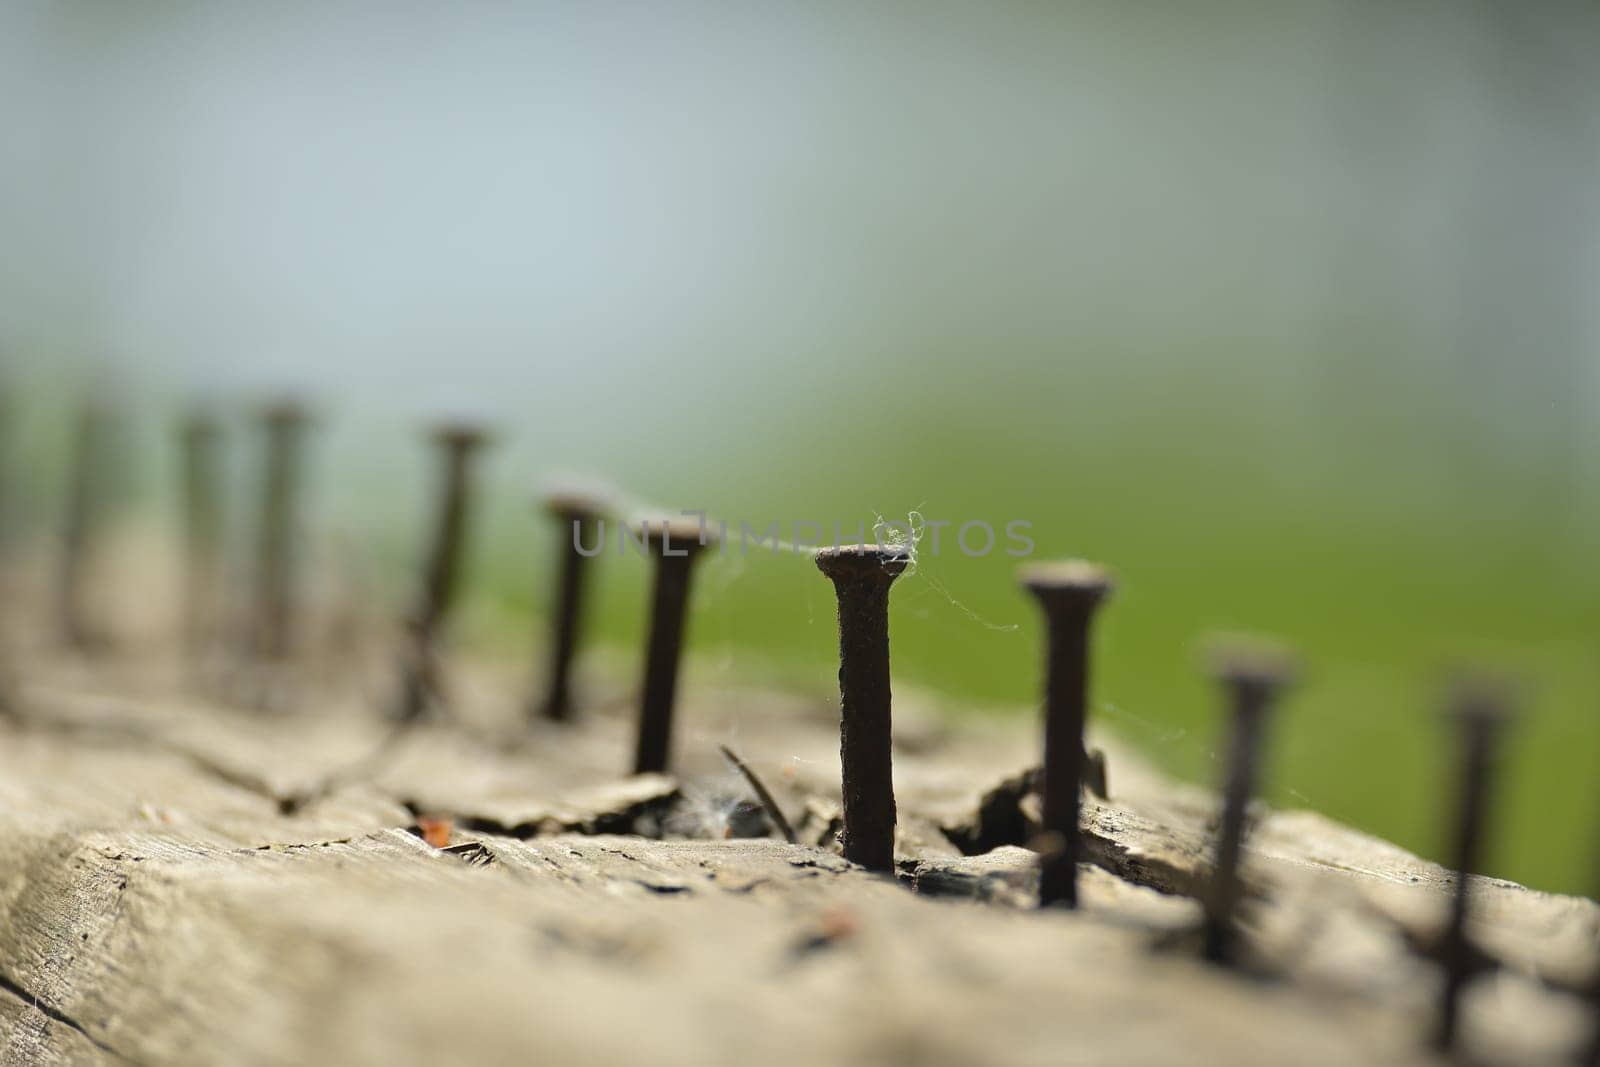 Close up view of weathered piece of wood, which hosts numerous rusted nails of different sizes driven halfway through, selective focus in blurred background